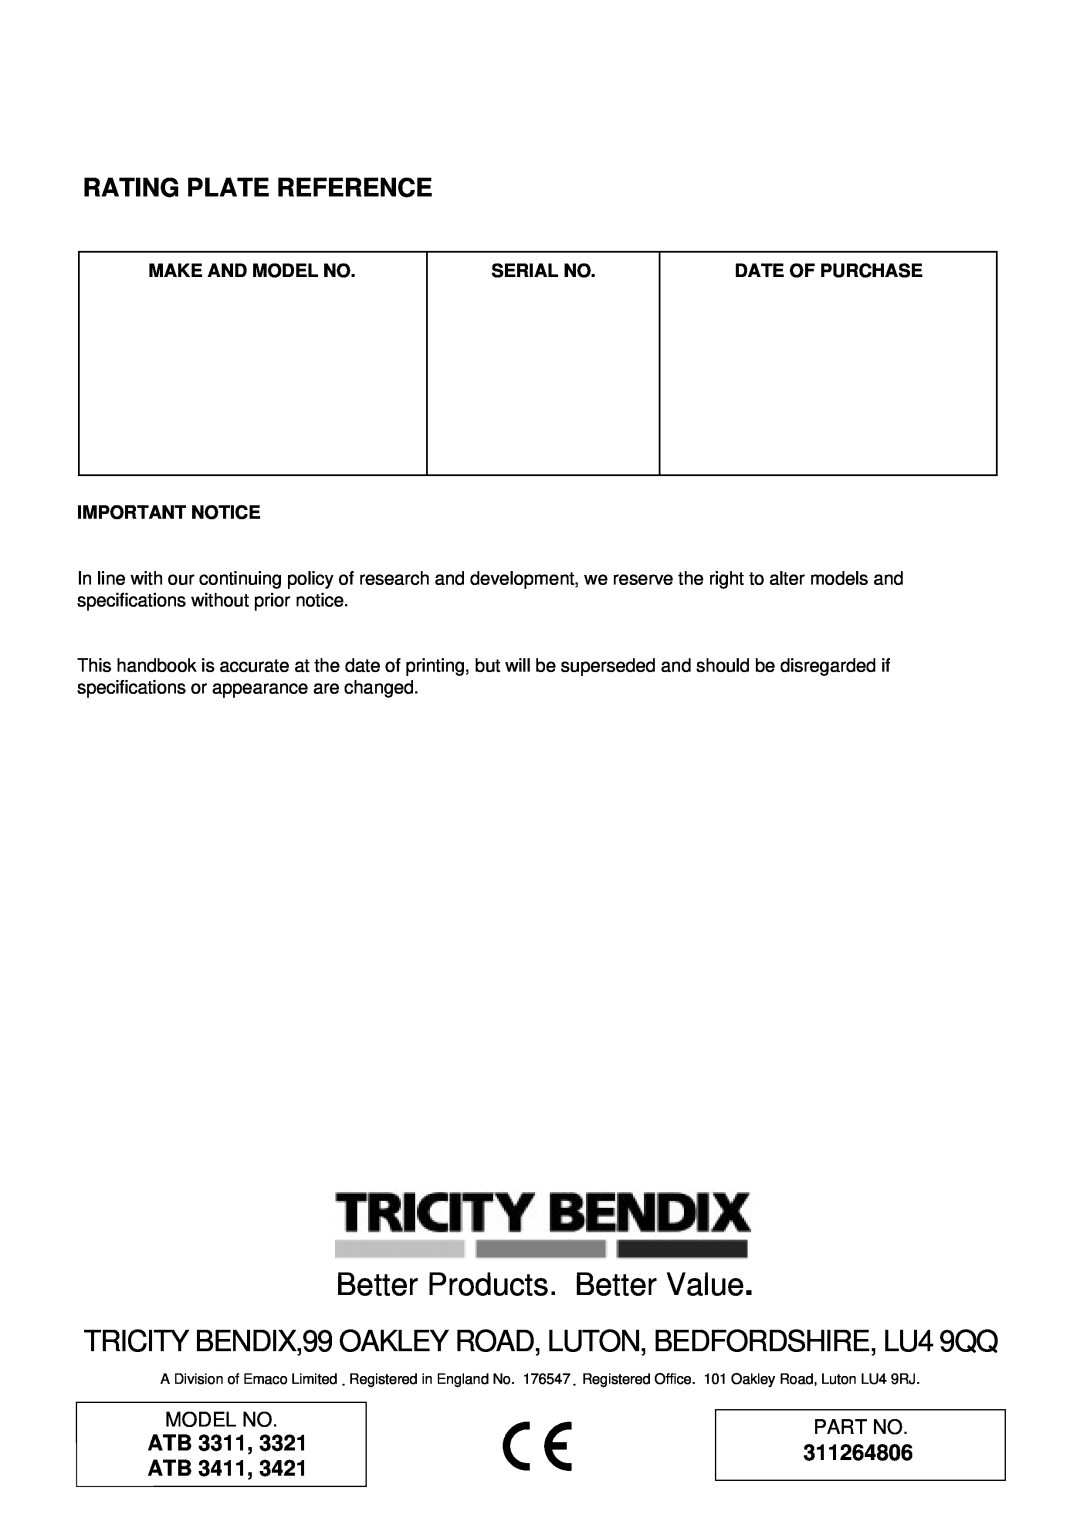 Tricity Bendix SOMERSET Rating Plate Reference, ATB 3311, 3321 ATB, 311264806, Better Products. Better Value, Model No 